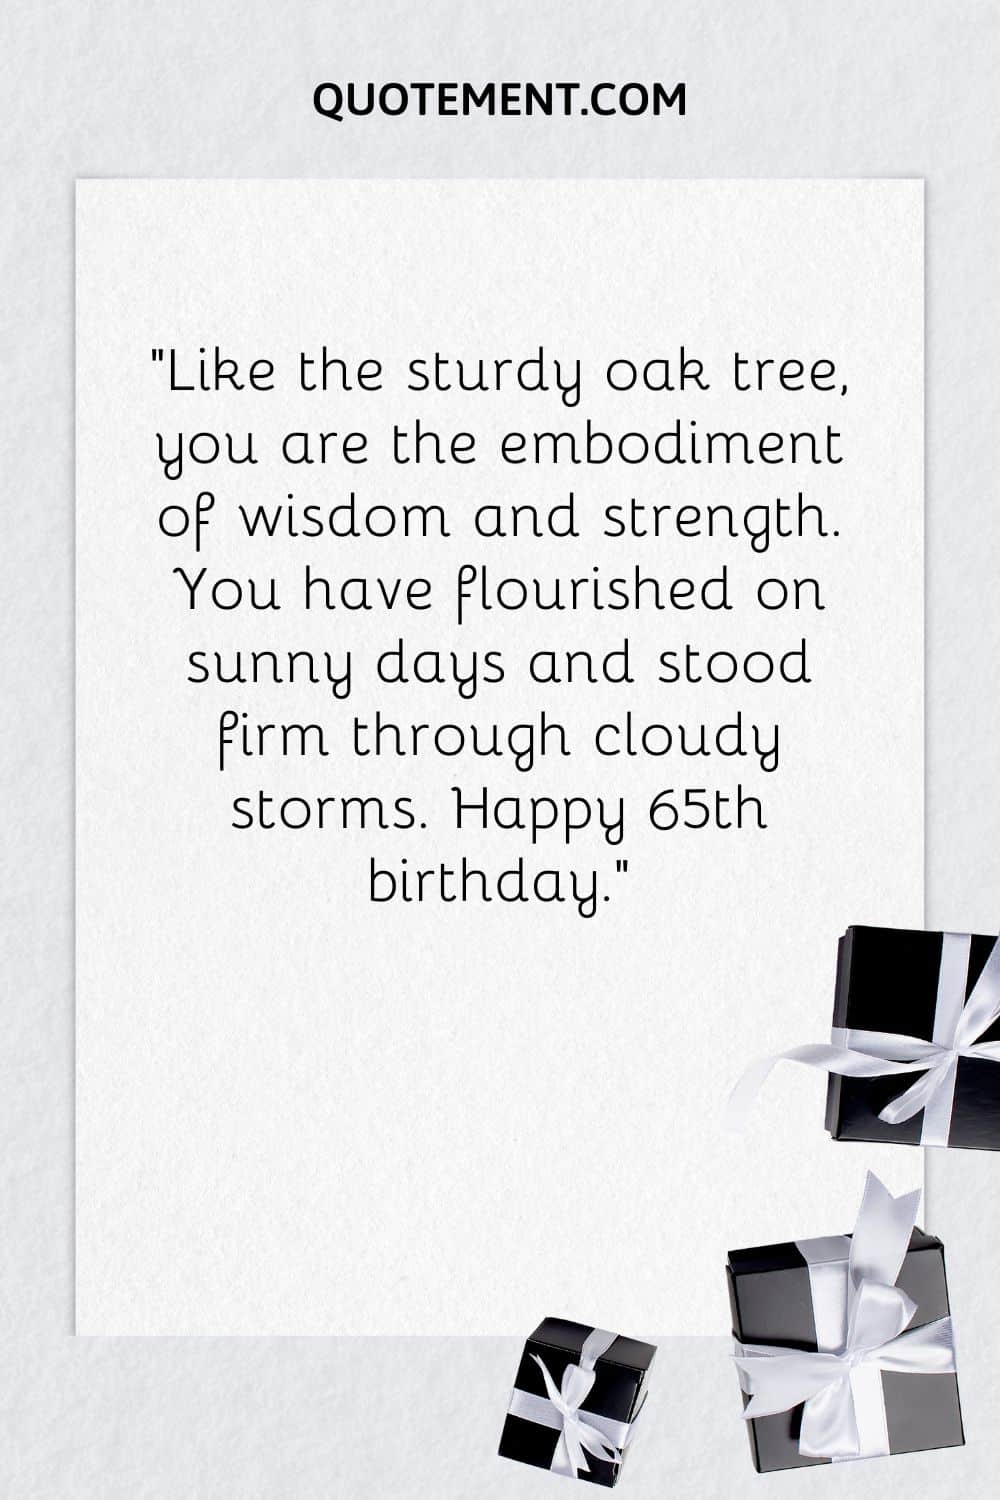 “Like the sturdy oak tree, you are the embodiment of wisdom and strength. You have flourished on sunny days and stood firm through cloudy storms. Happy 65th birthday.”